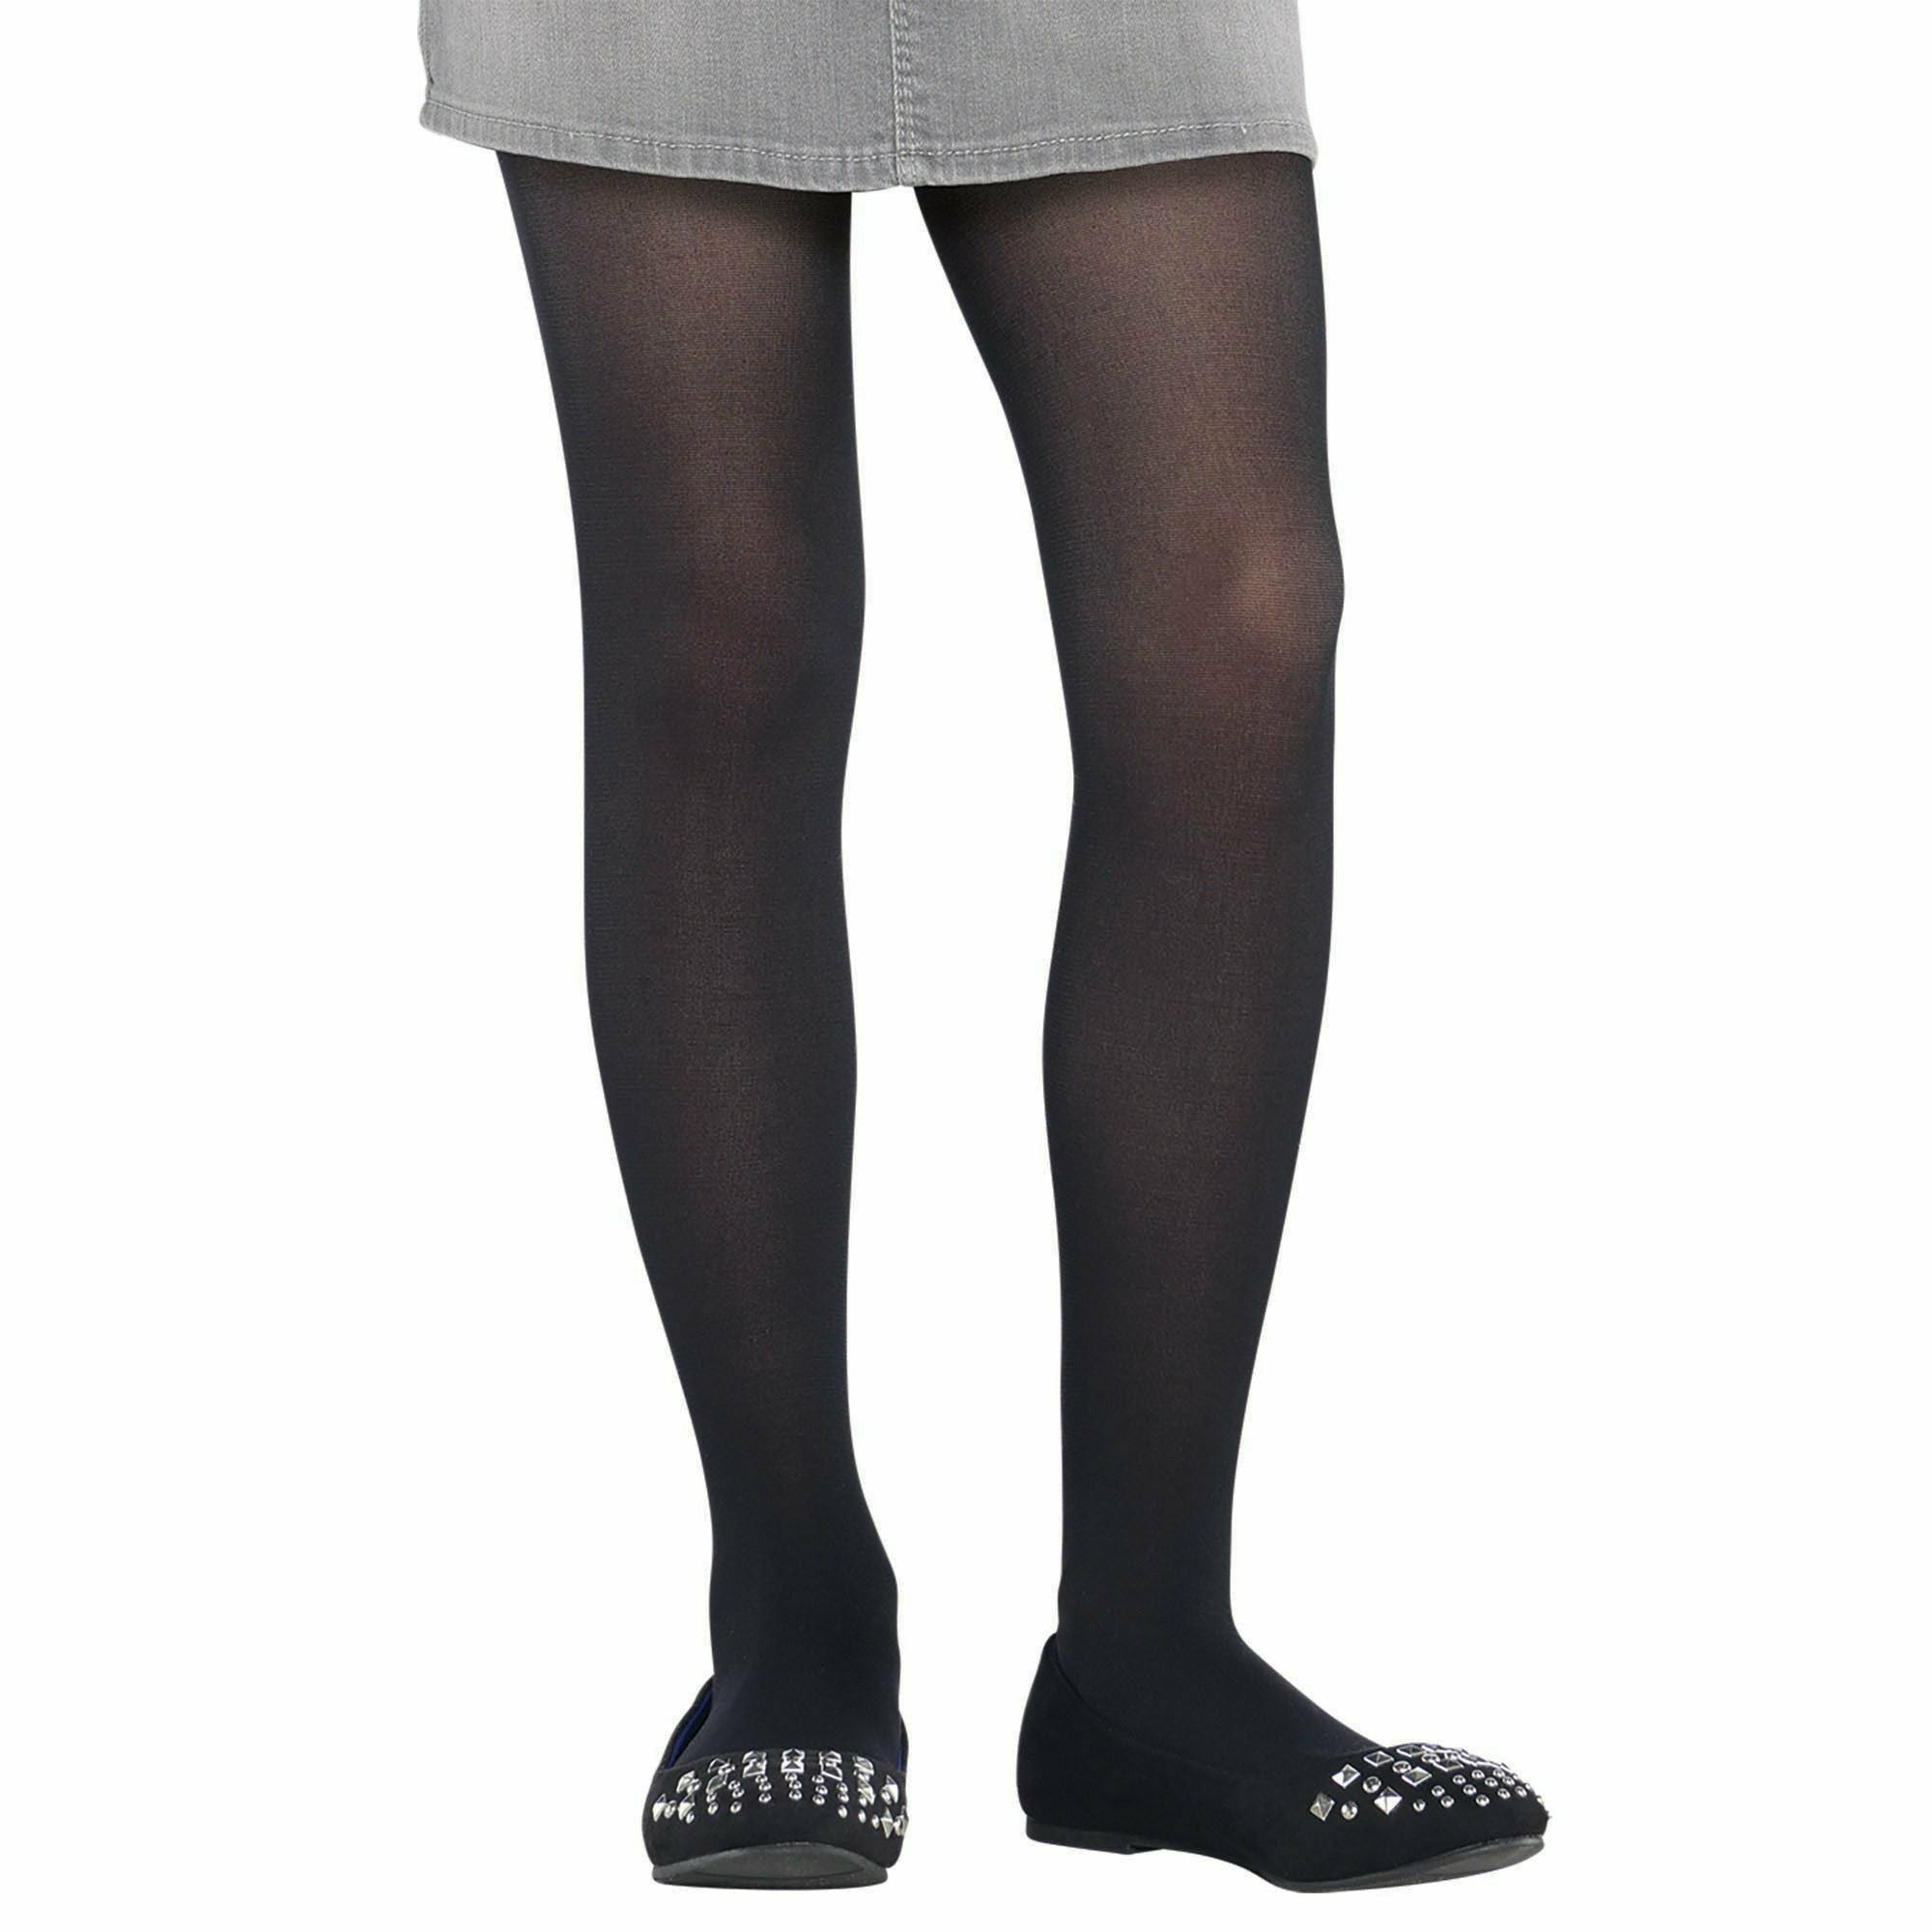 Black Bamboo Footless Tights - Sapphire Butterfly